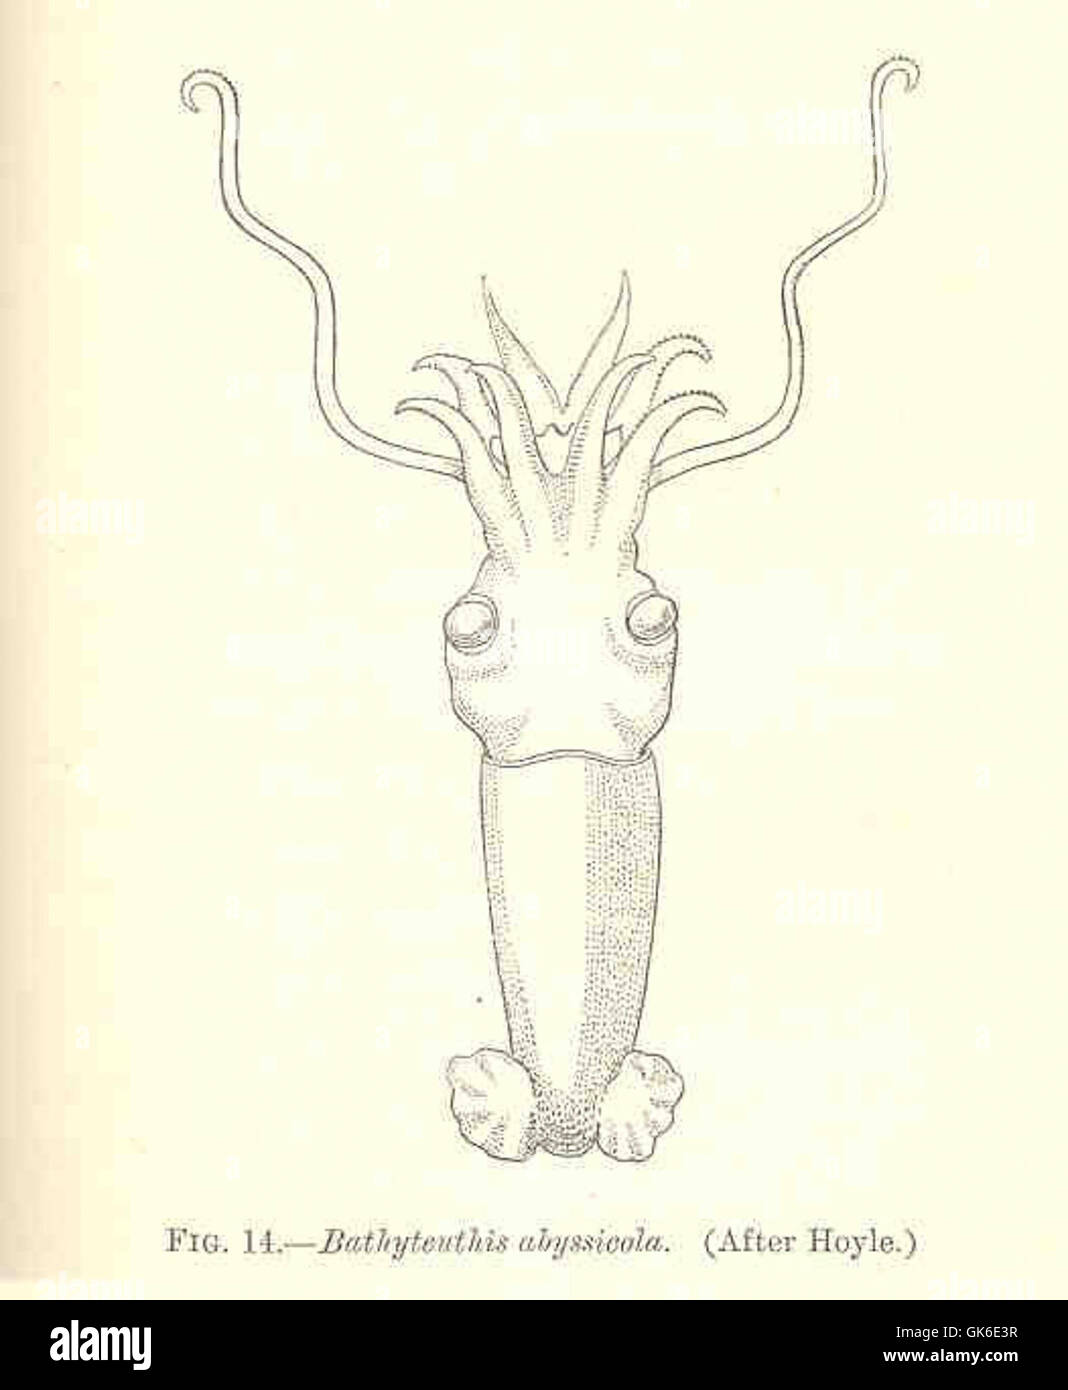 35976 Bathyteuthis abyssicola (After Hoyle) Stock Photo